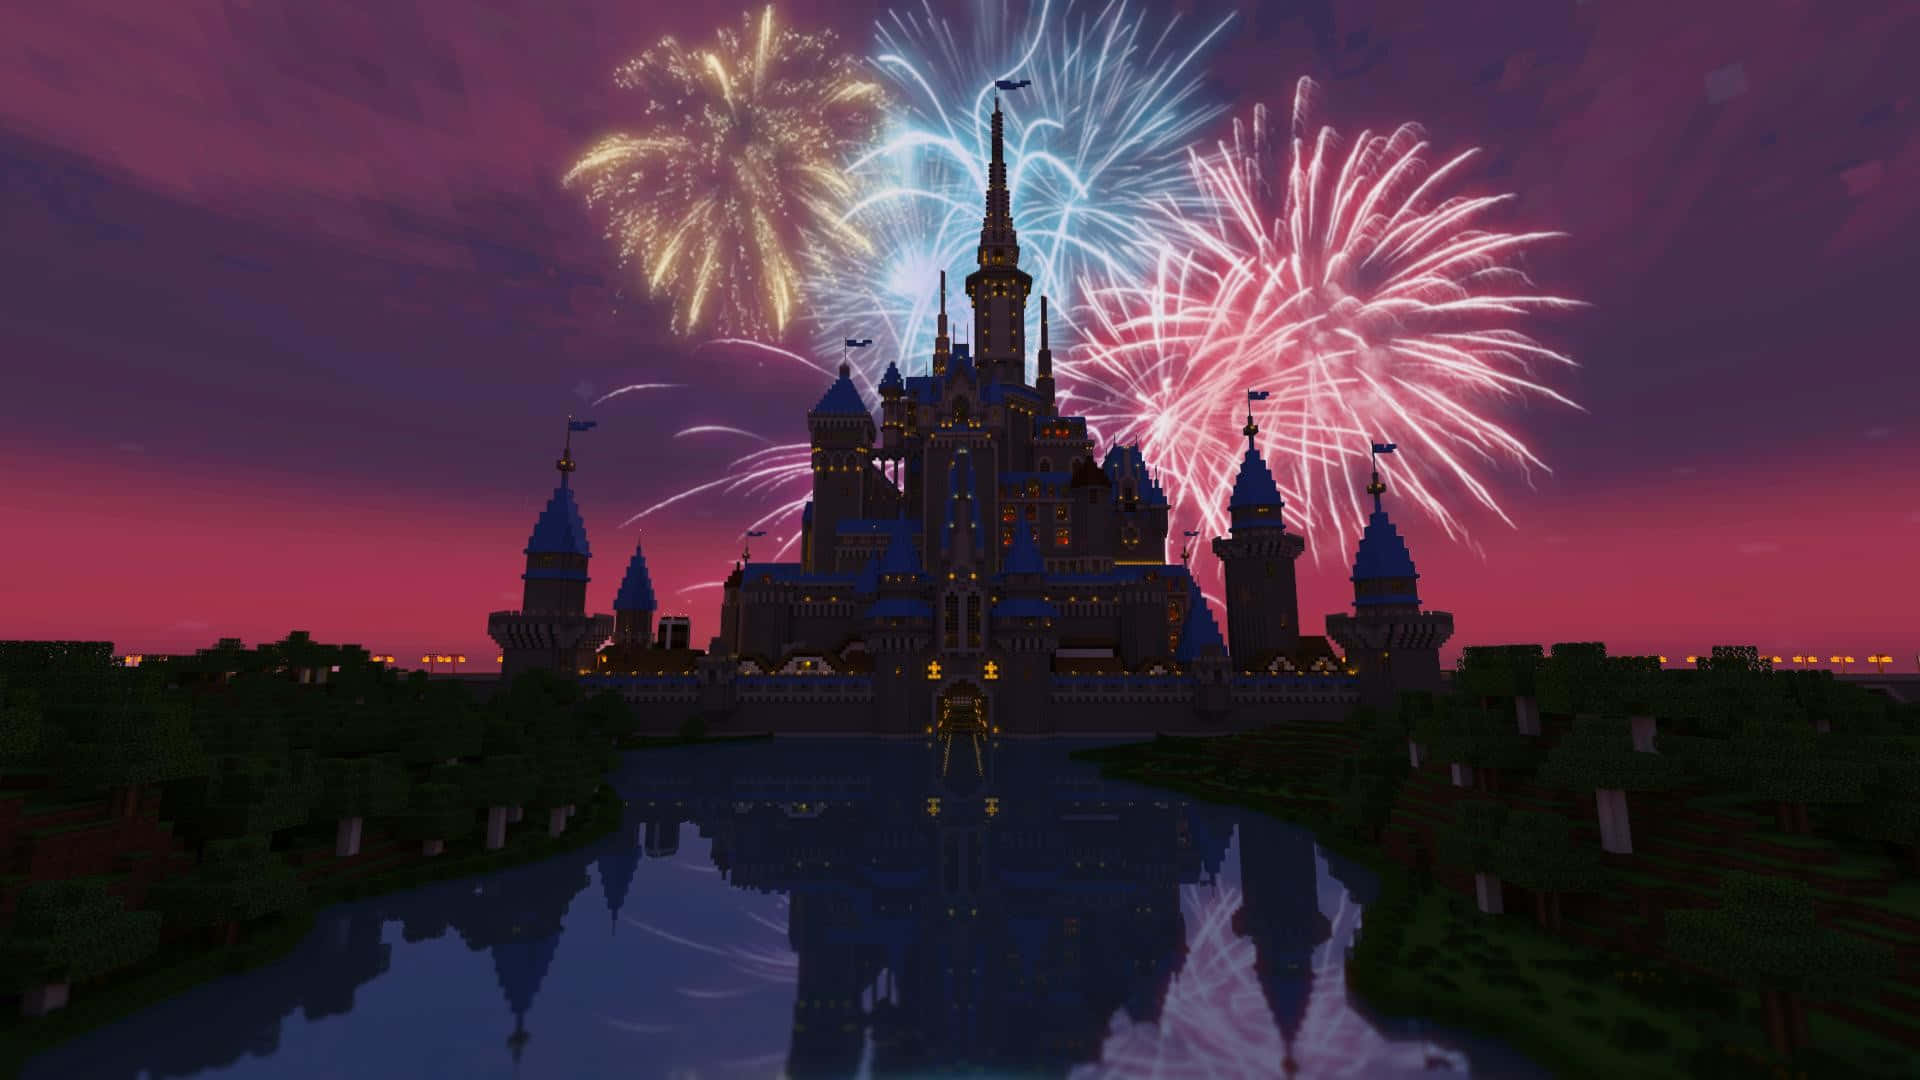 Cinderella Castle With Fireworks In The Sky